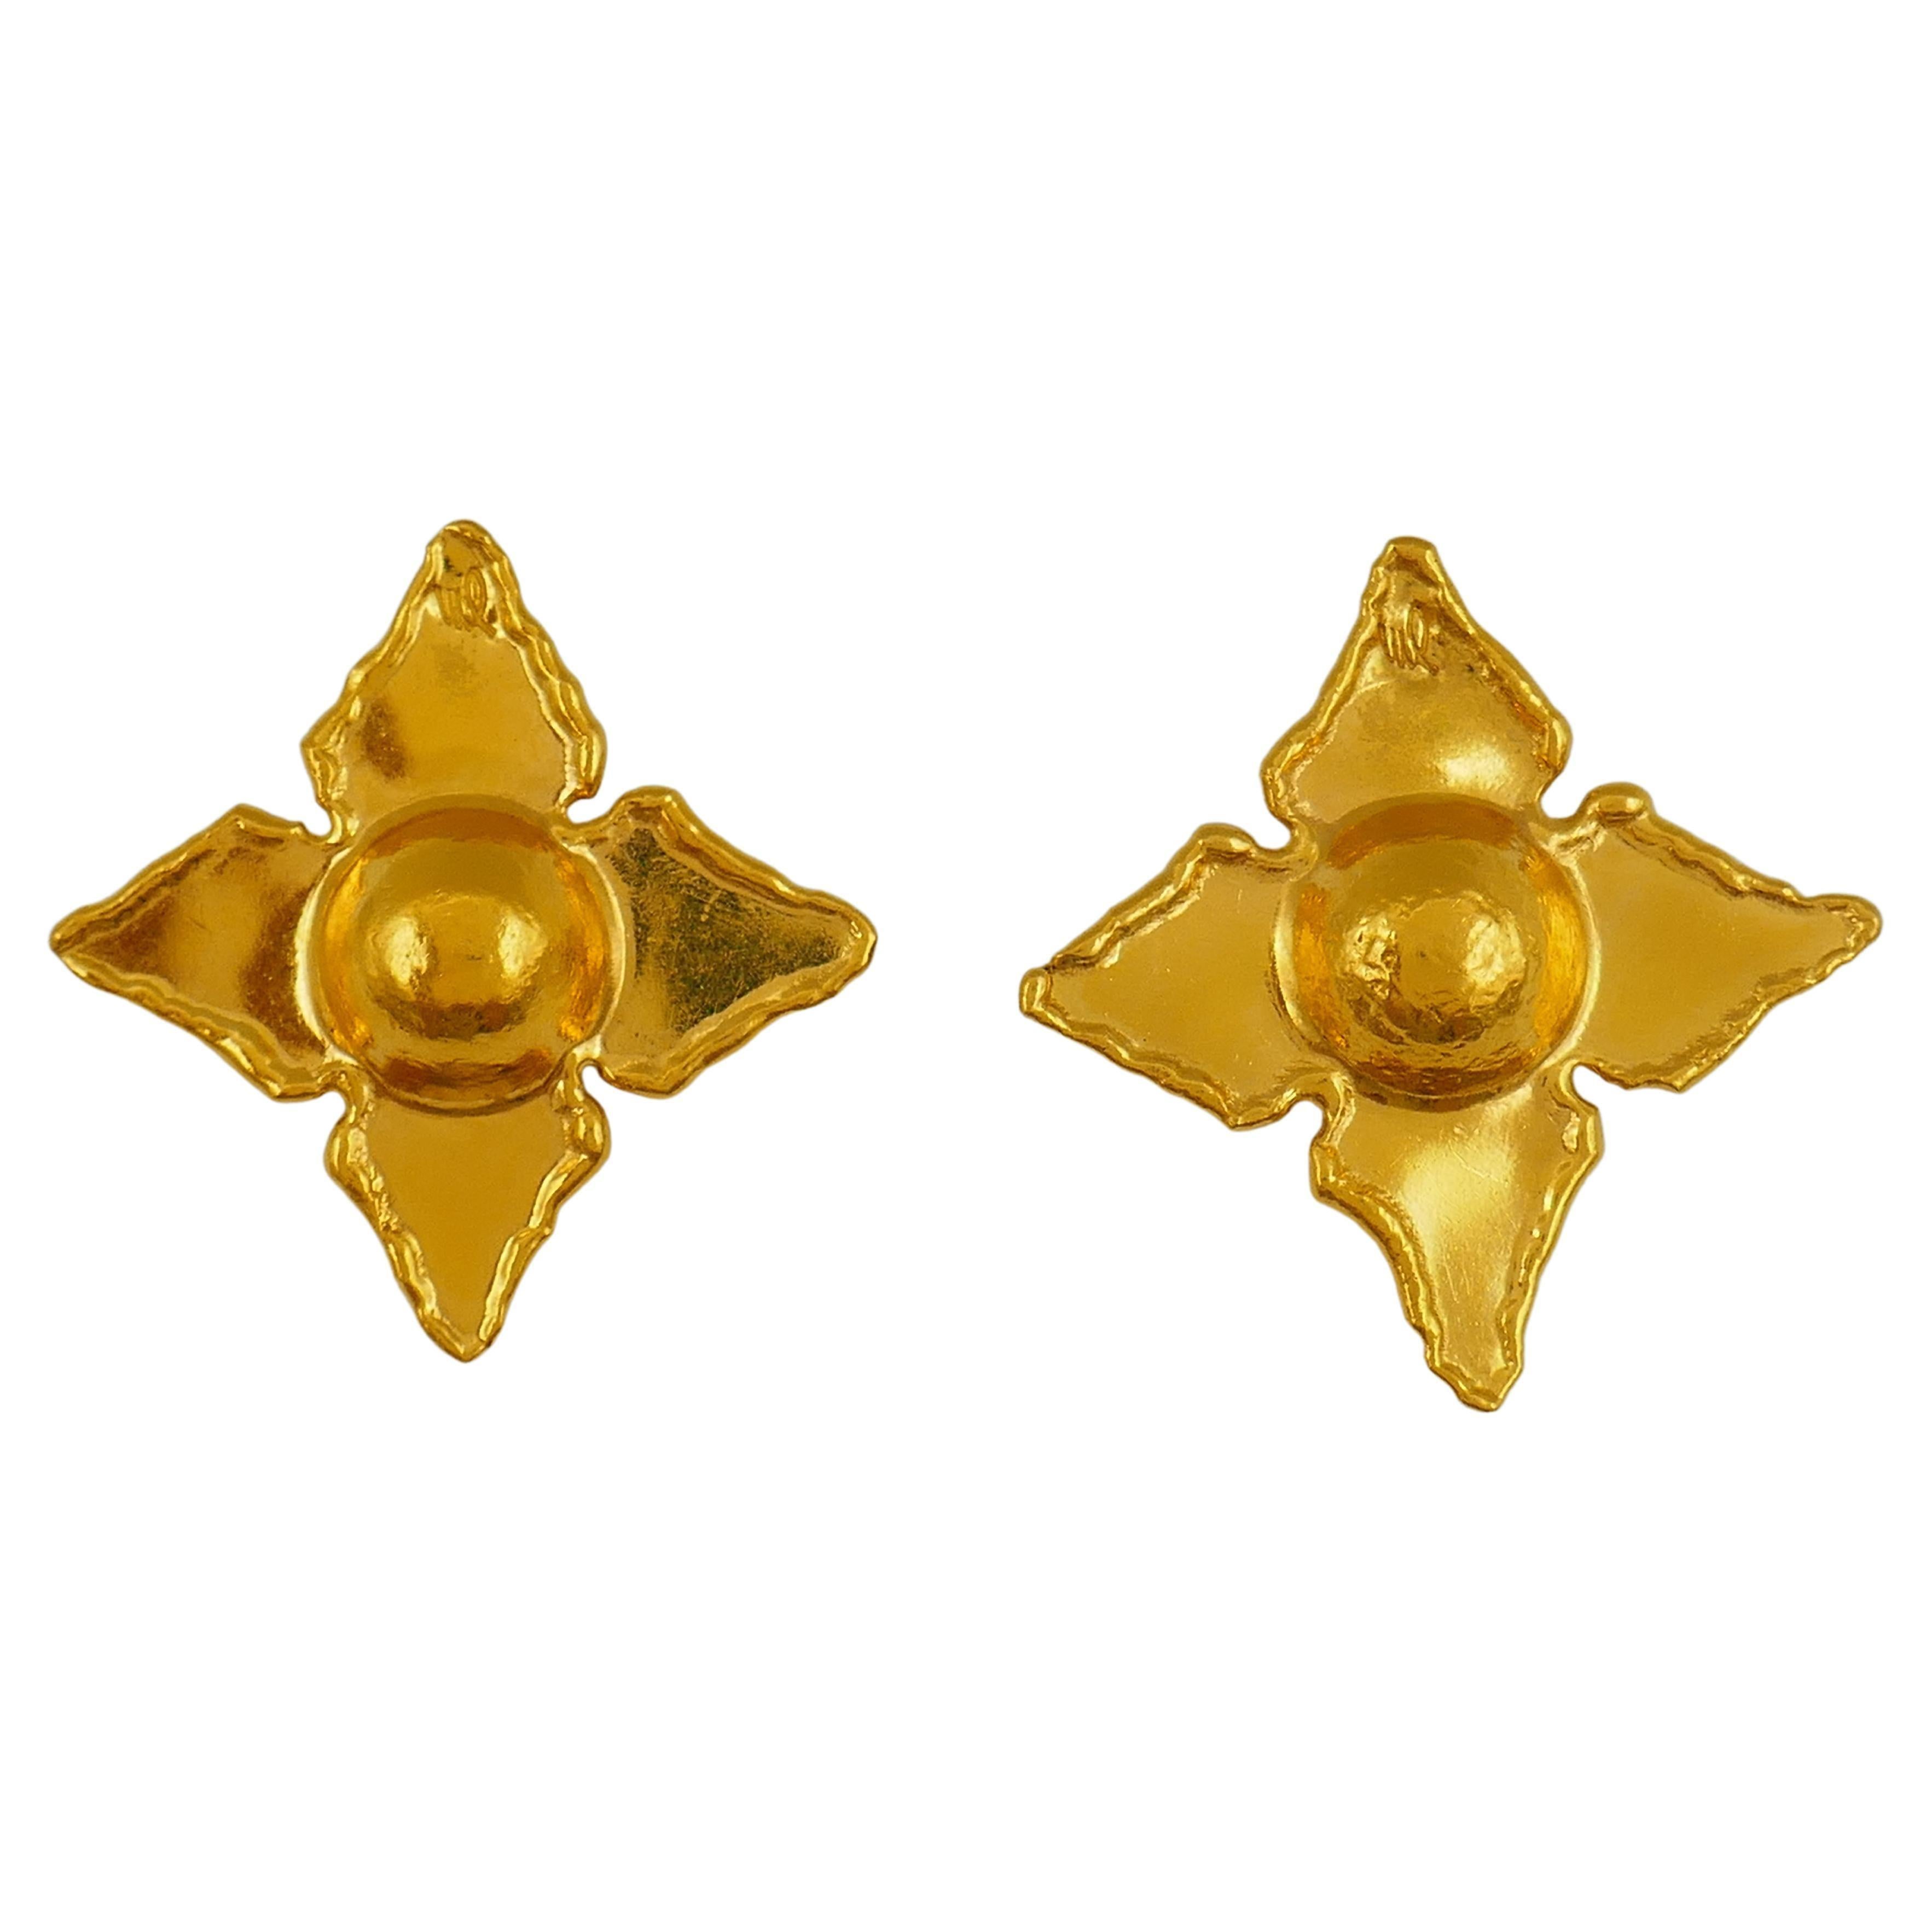 A gorgeous pair of earrings by Jean Mahie, made of 22k gold.
The earrings are designed as starry flowers with a convex center and four flat pointy petals. The hammered petals' edges have a great uneven feel. 
The gold has a distinct Mahie's look and